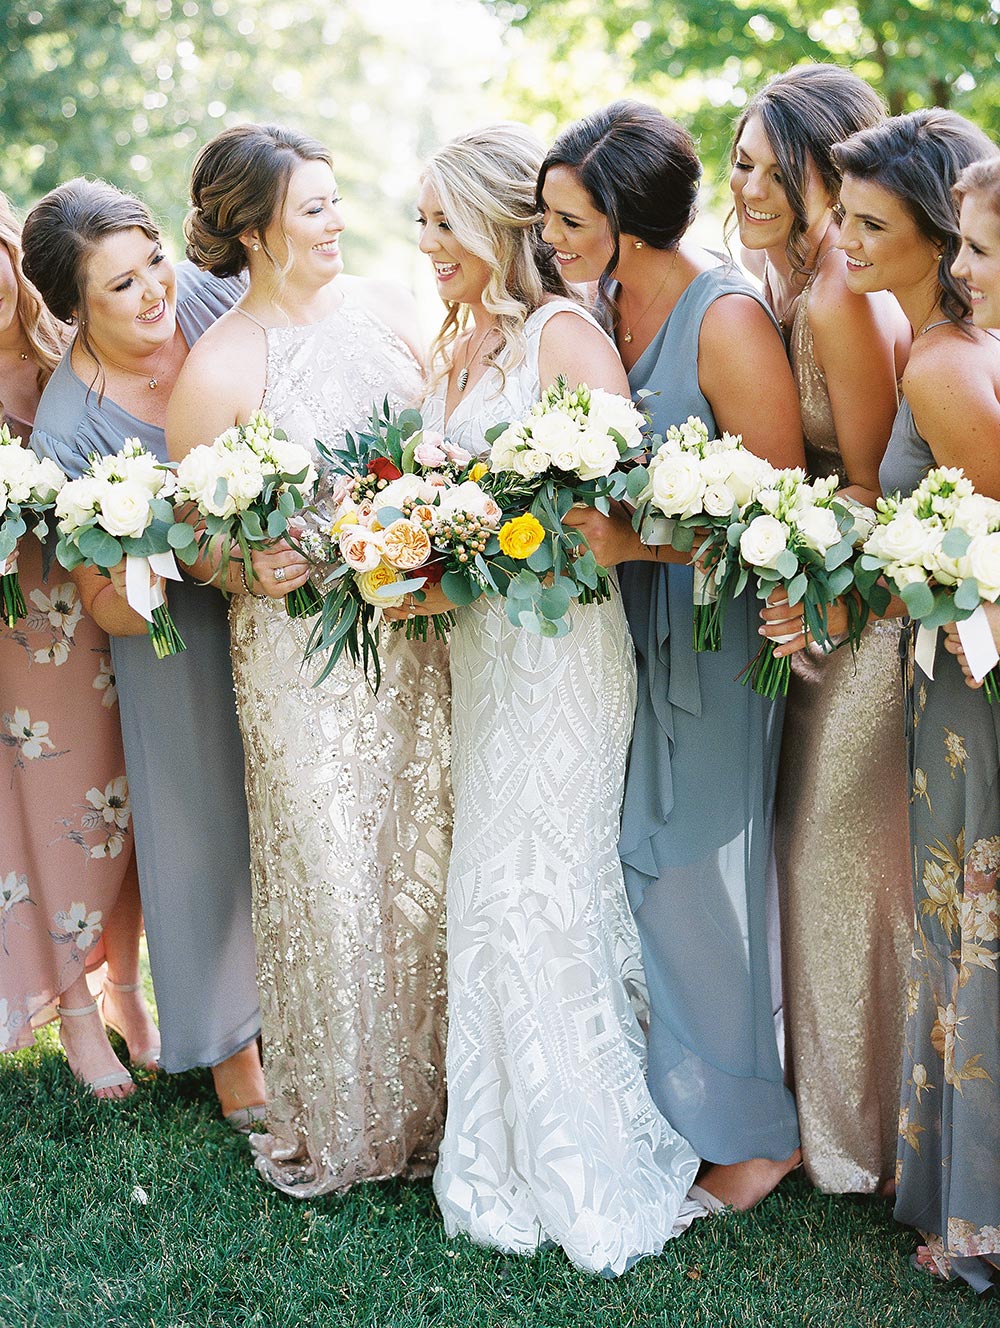 patterned wedding dress with mismatched printed bridesmaid dresses